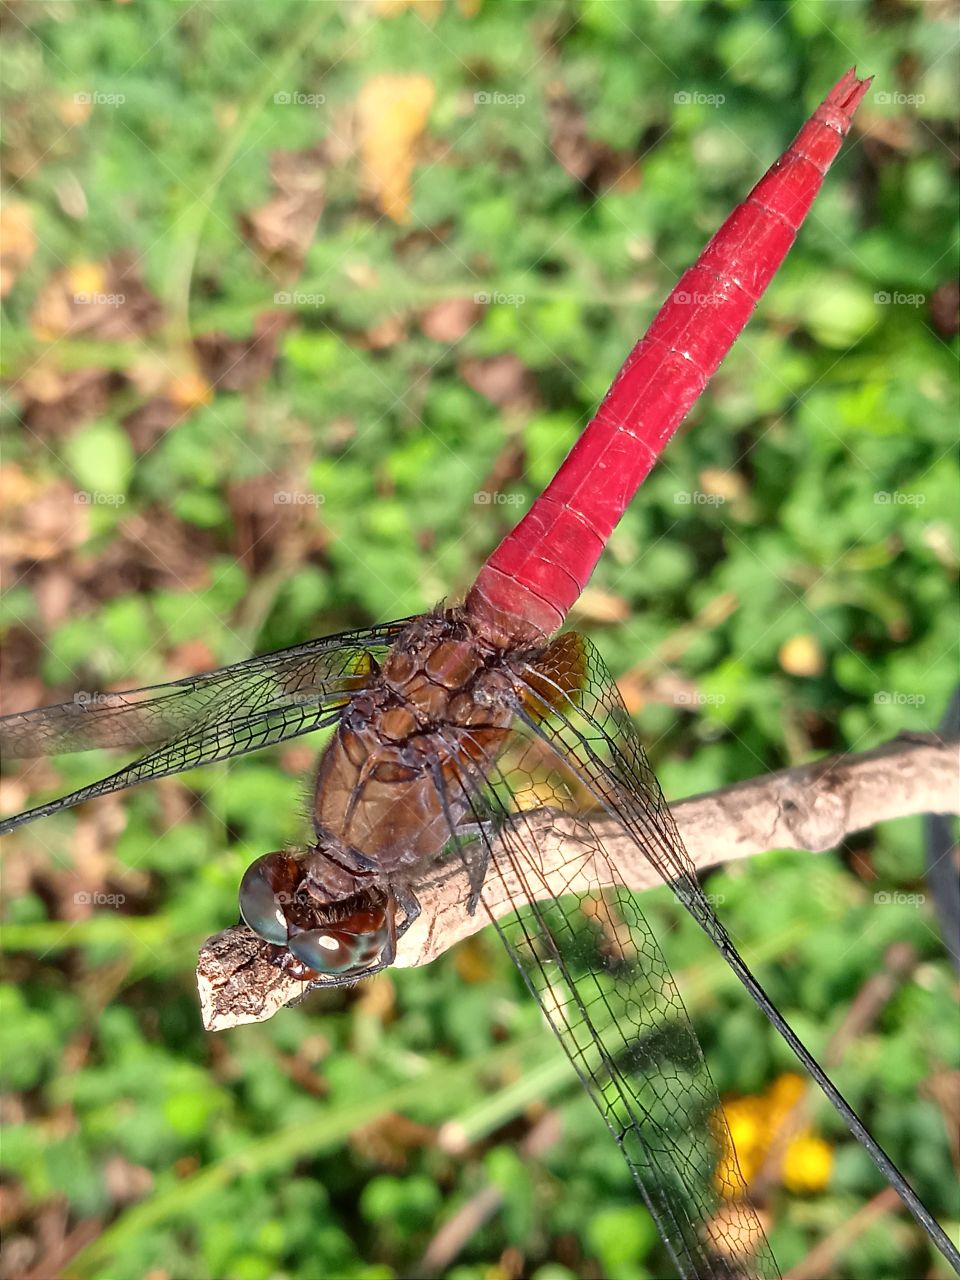 A beautiful red colour dragonfly's tail.